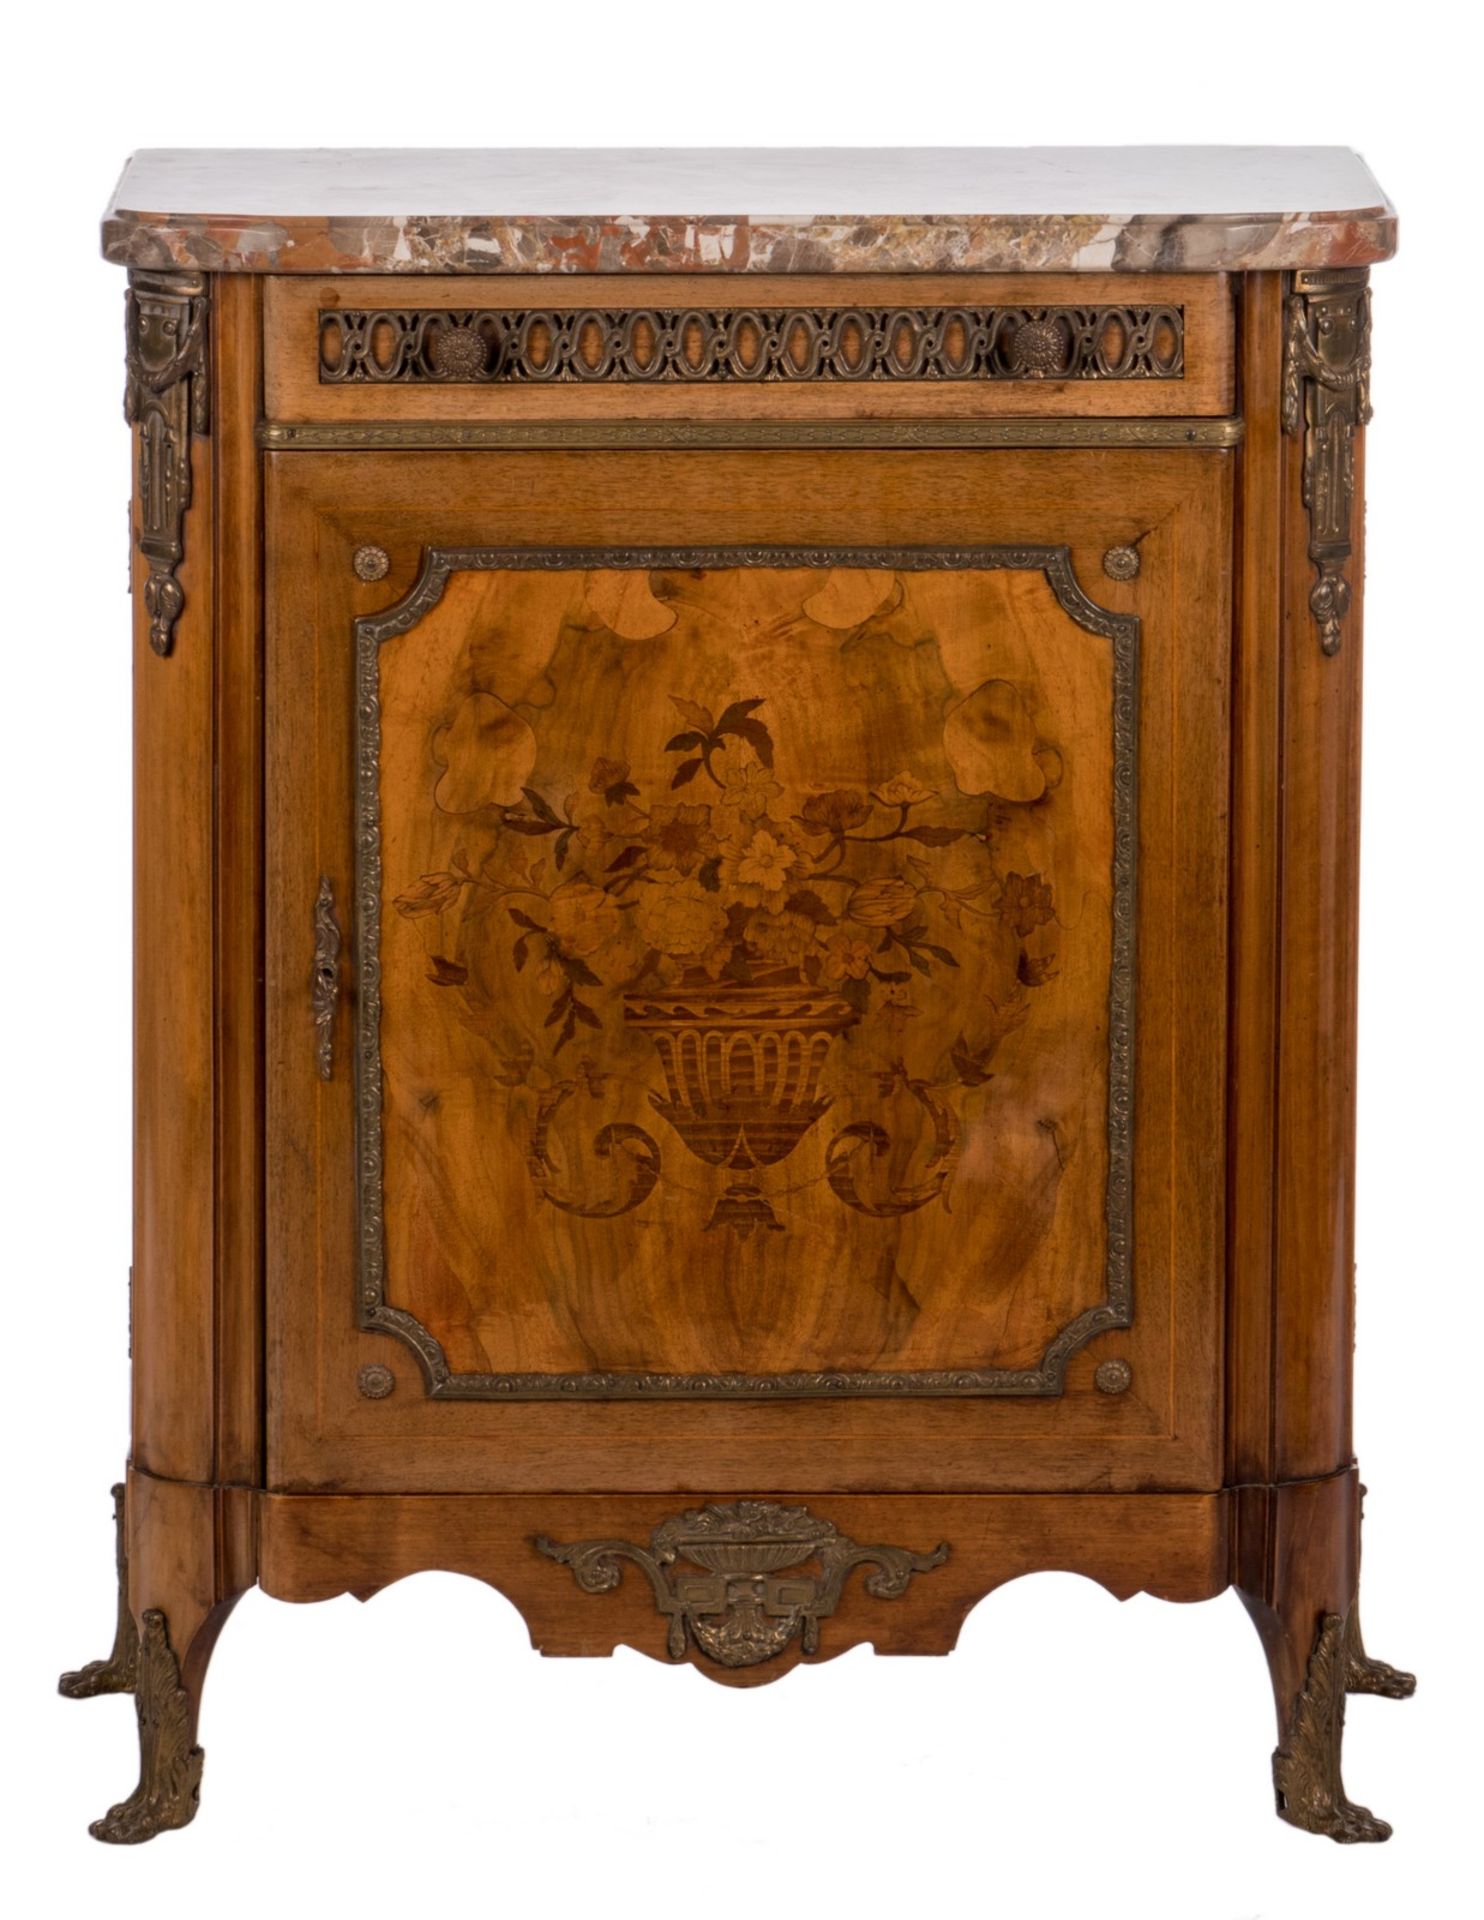 A Neoclassical cabinet, walnut and marquetery veneered, with marble top, style De Coene -